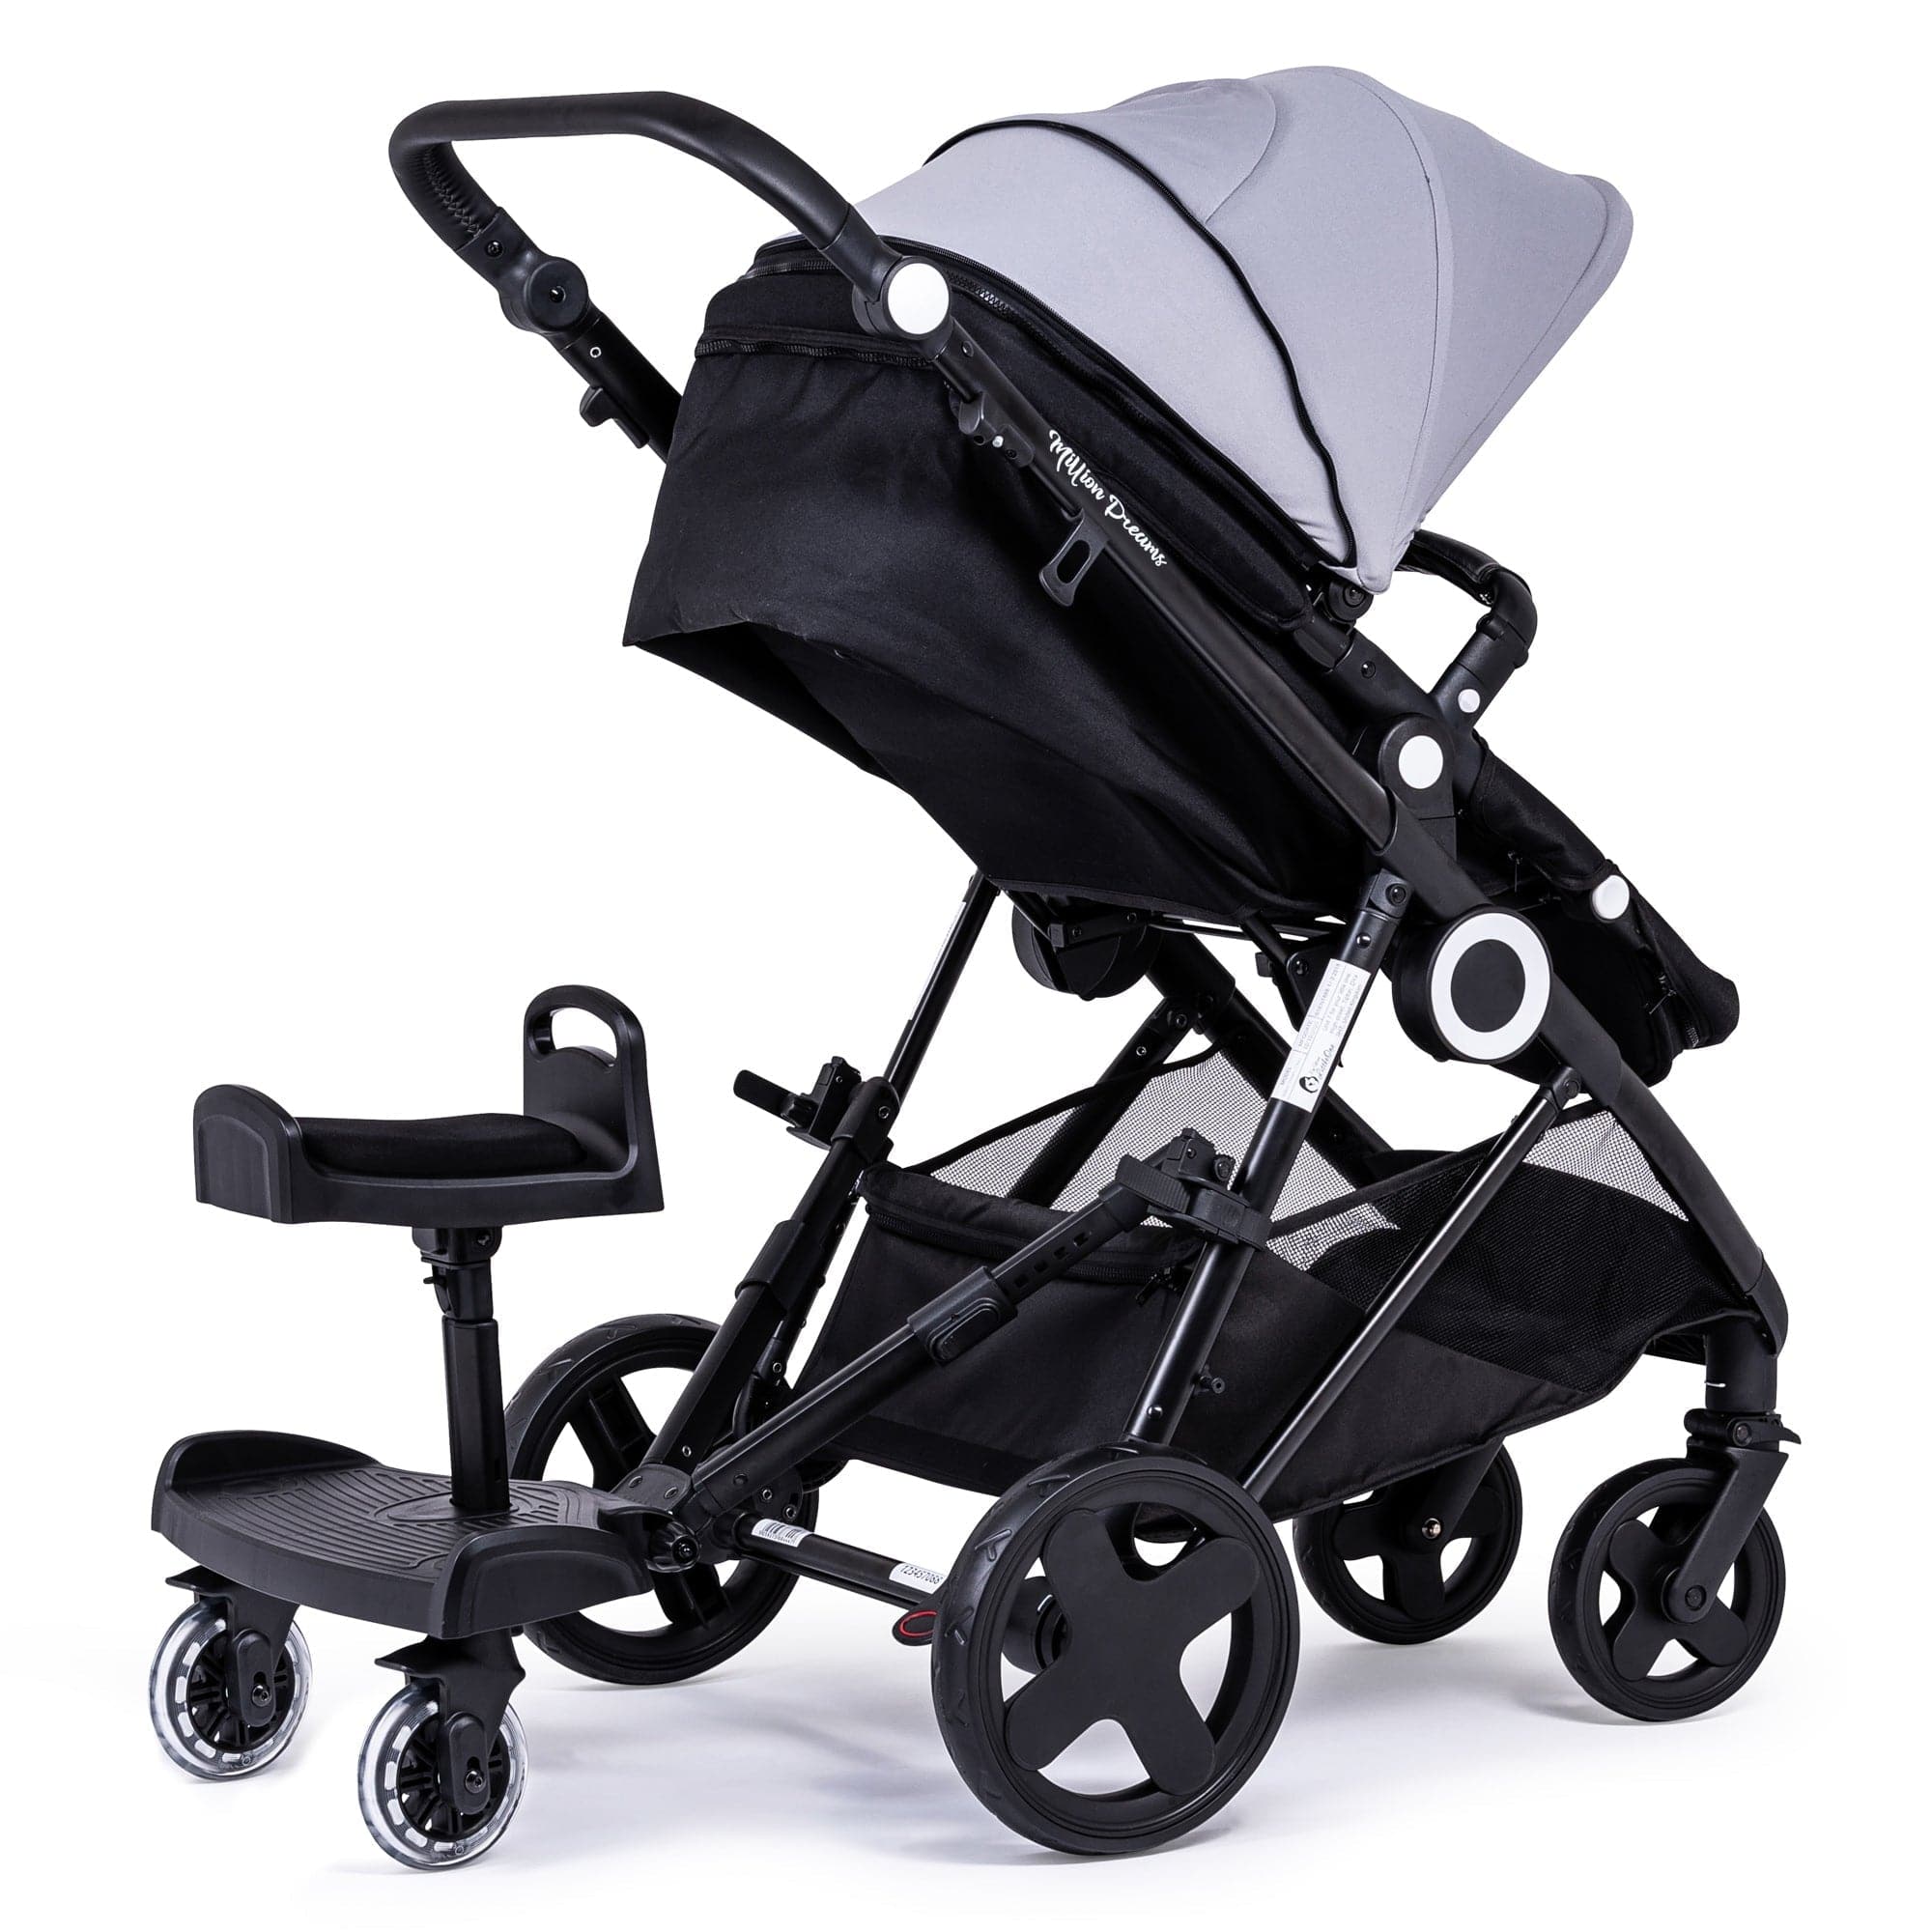 Ride On Board with Saddle Compatible with Baby Elegance - For Your Little One